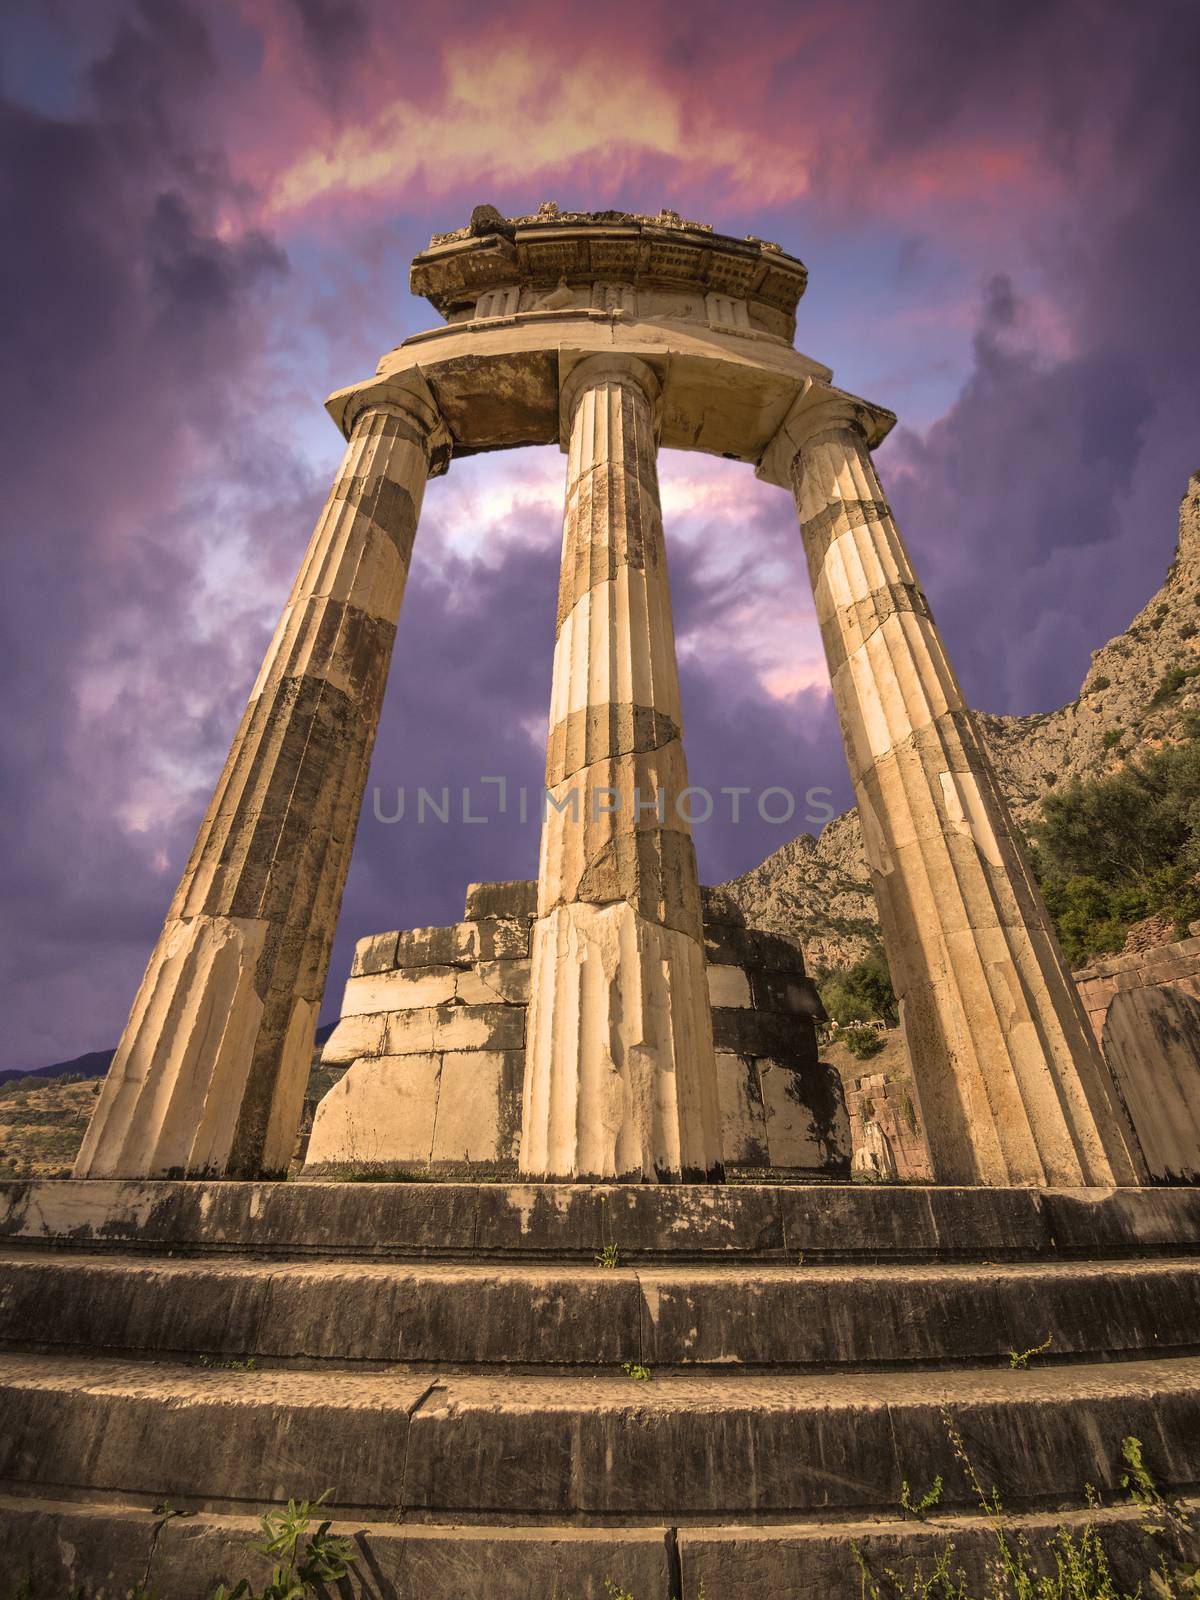 Tholos at Delphi, Greece by f/2sumicron